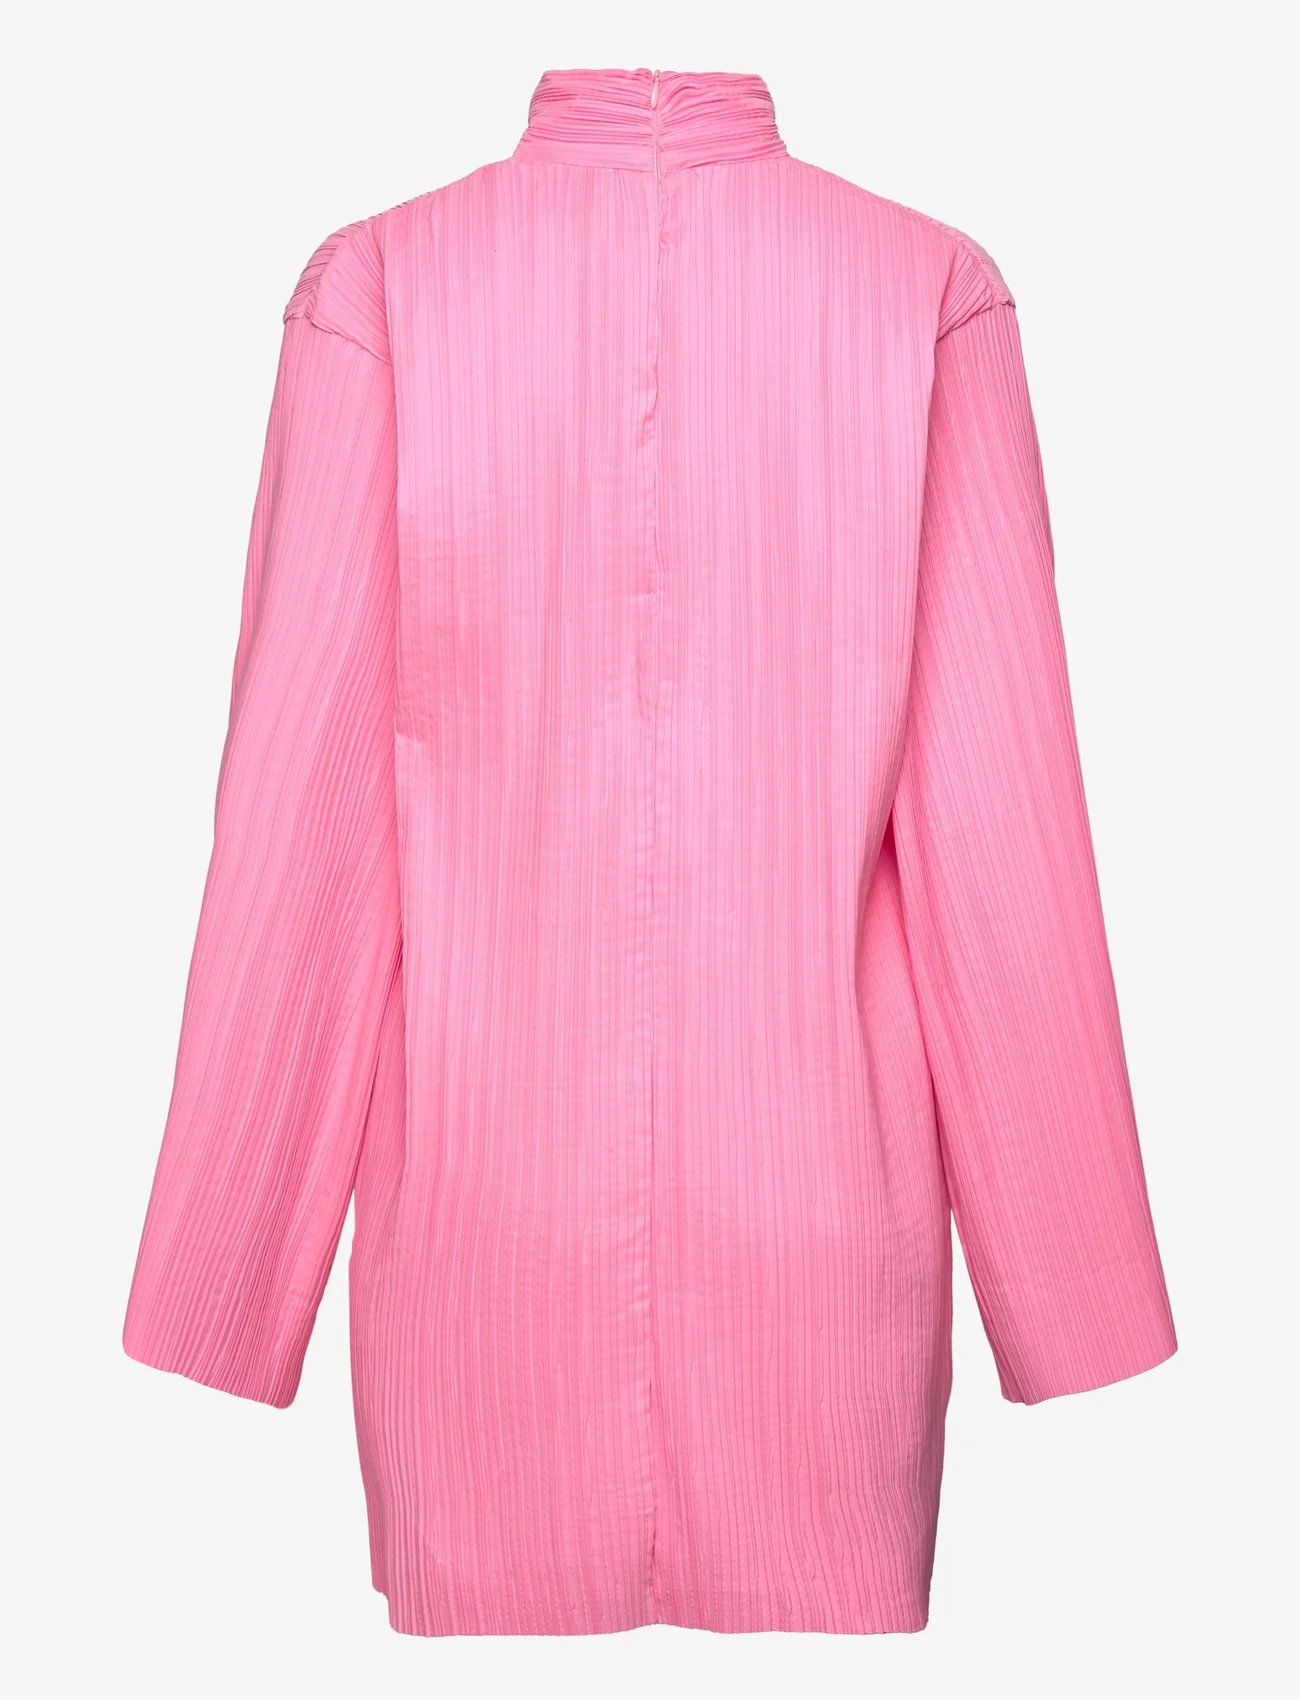 Mads Nørgaard - Paper Pleat Hausach Dress - party wear at outlet prices - cotton candy - 1